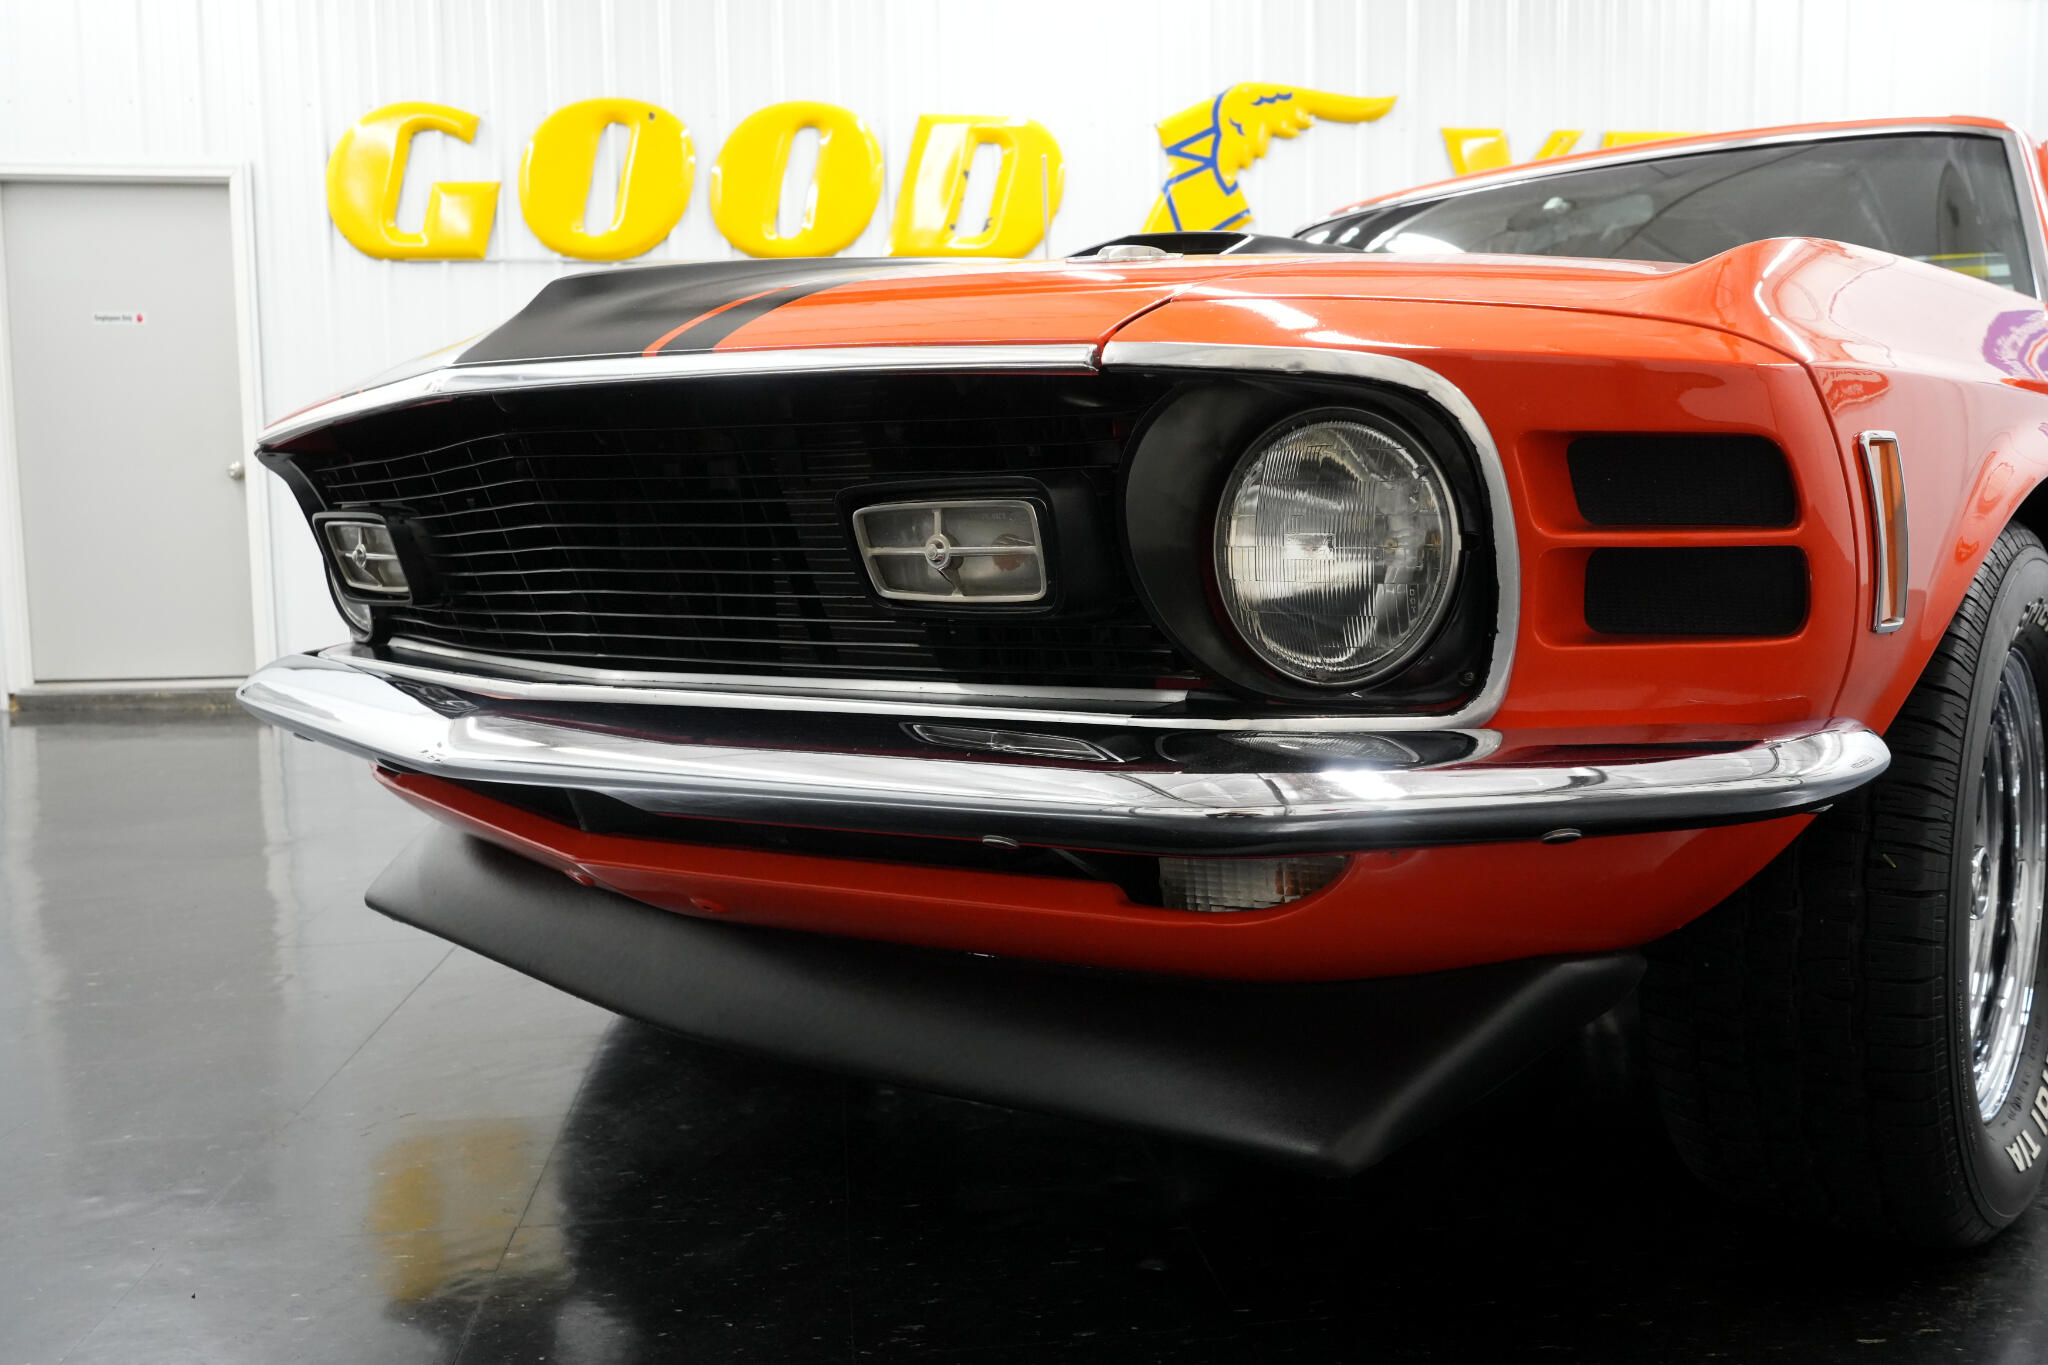 1970 Ford Mustang 22